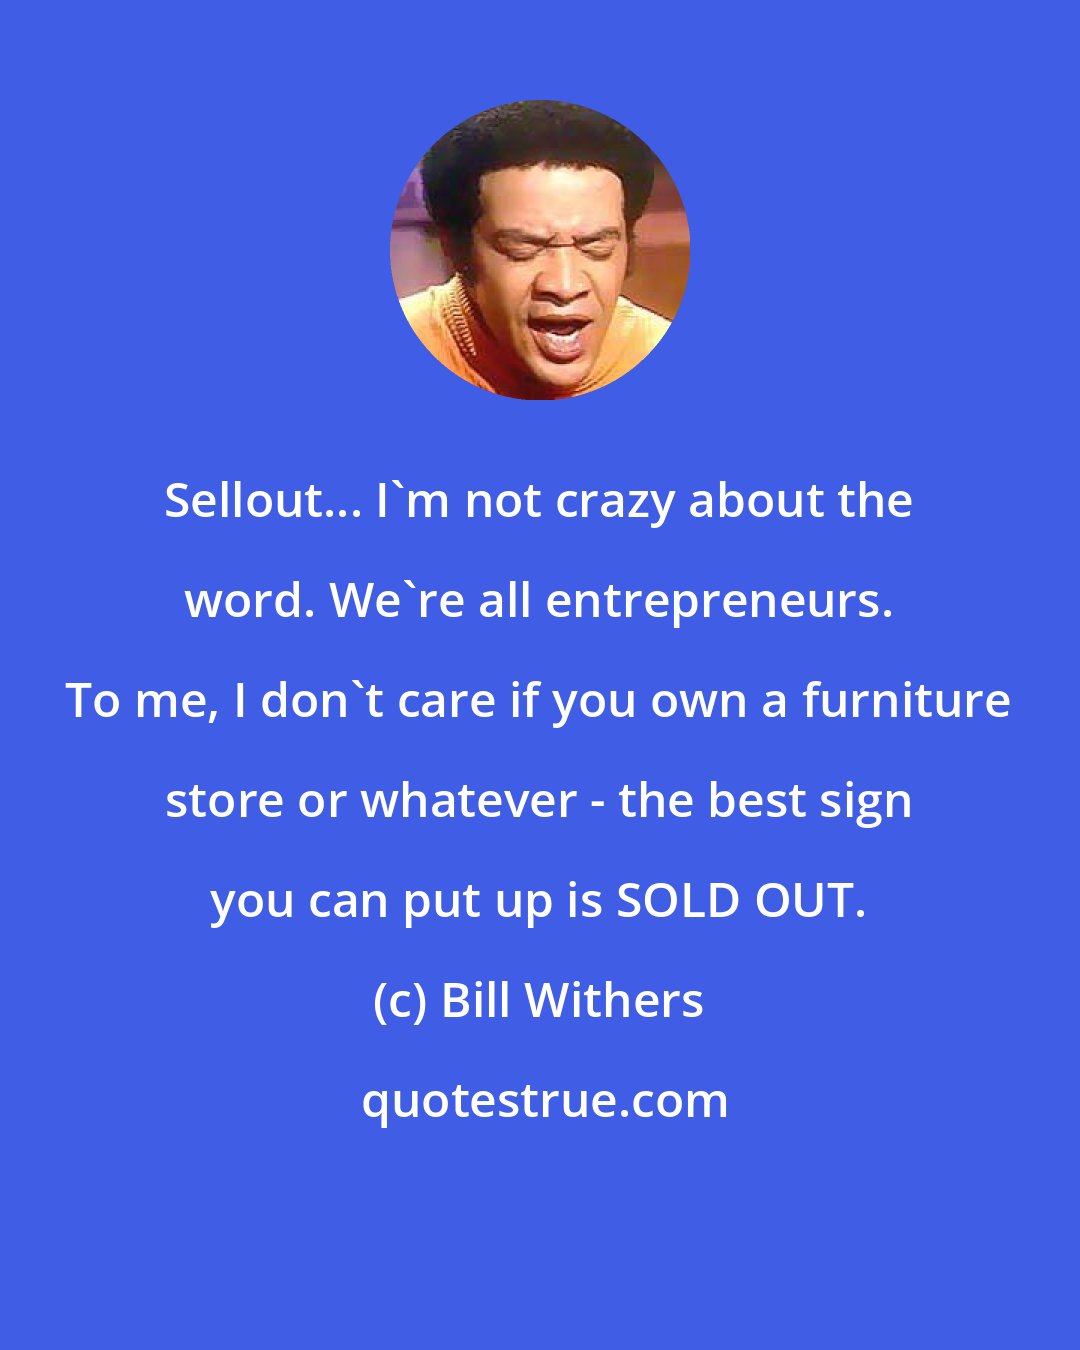 Bill Withers: Sellout... I'm not crazy about the word. We're all entrepreneurs. To me, I don't care if you own a furniture store or whatever - the best sign you can put up is SOLD OUT.